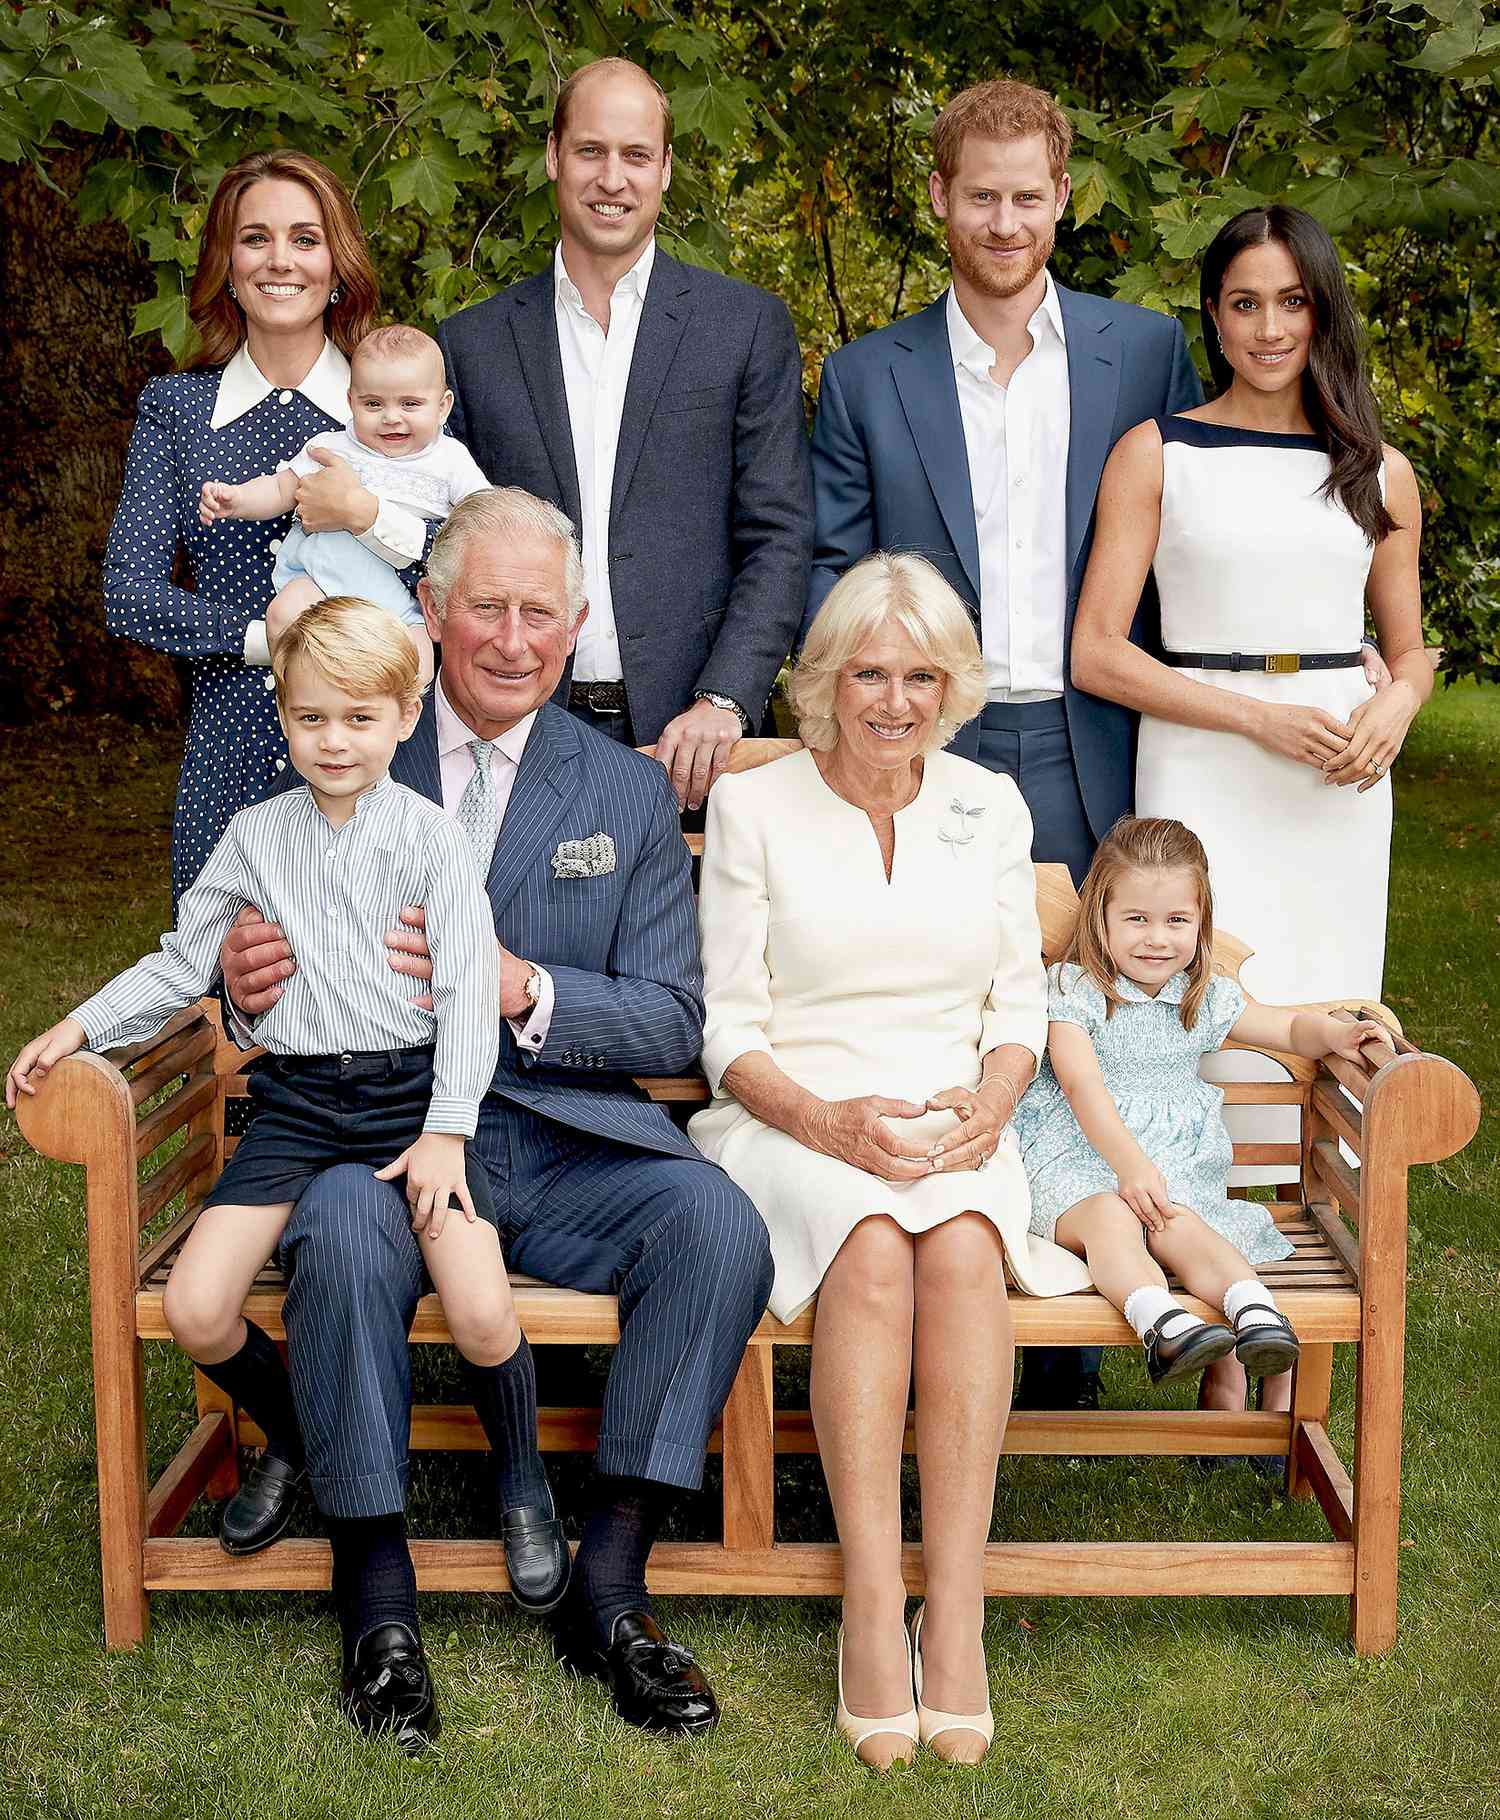 HRH The Prince of Wales Birthday Family Portrait